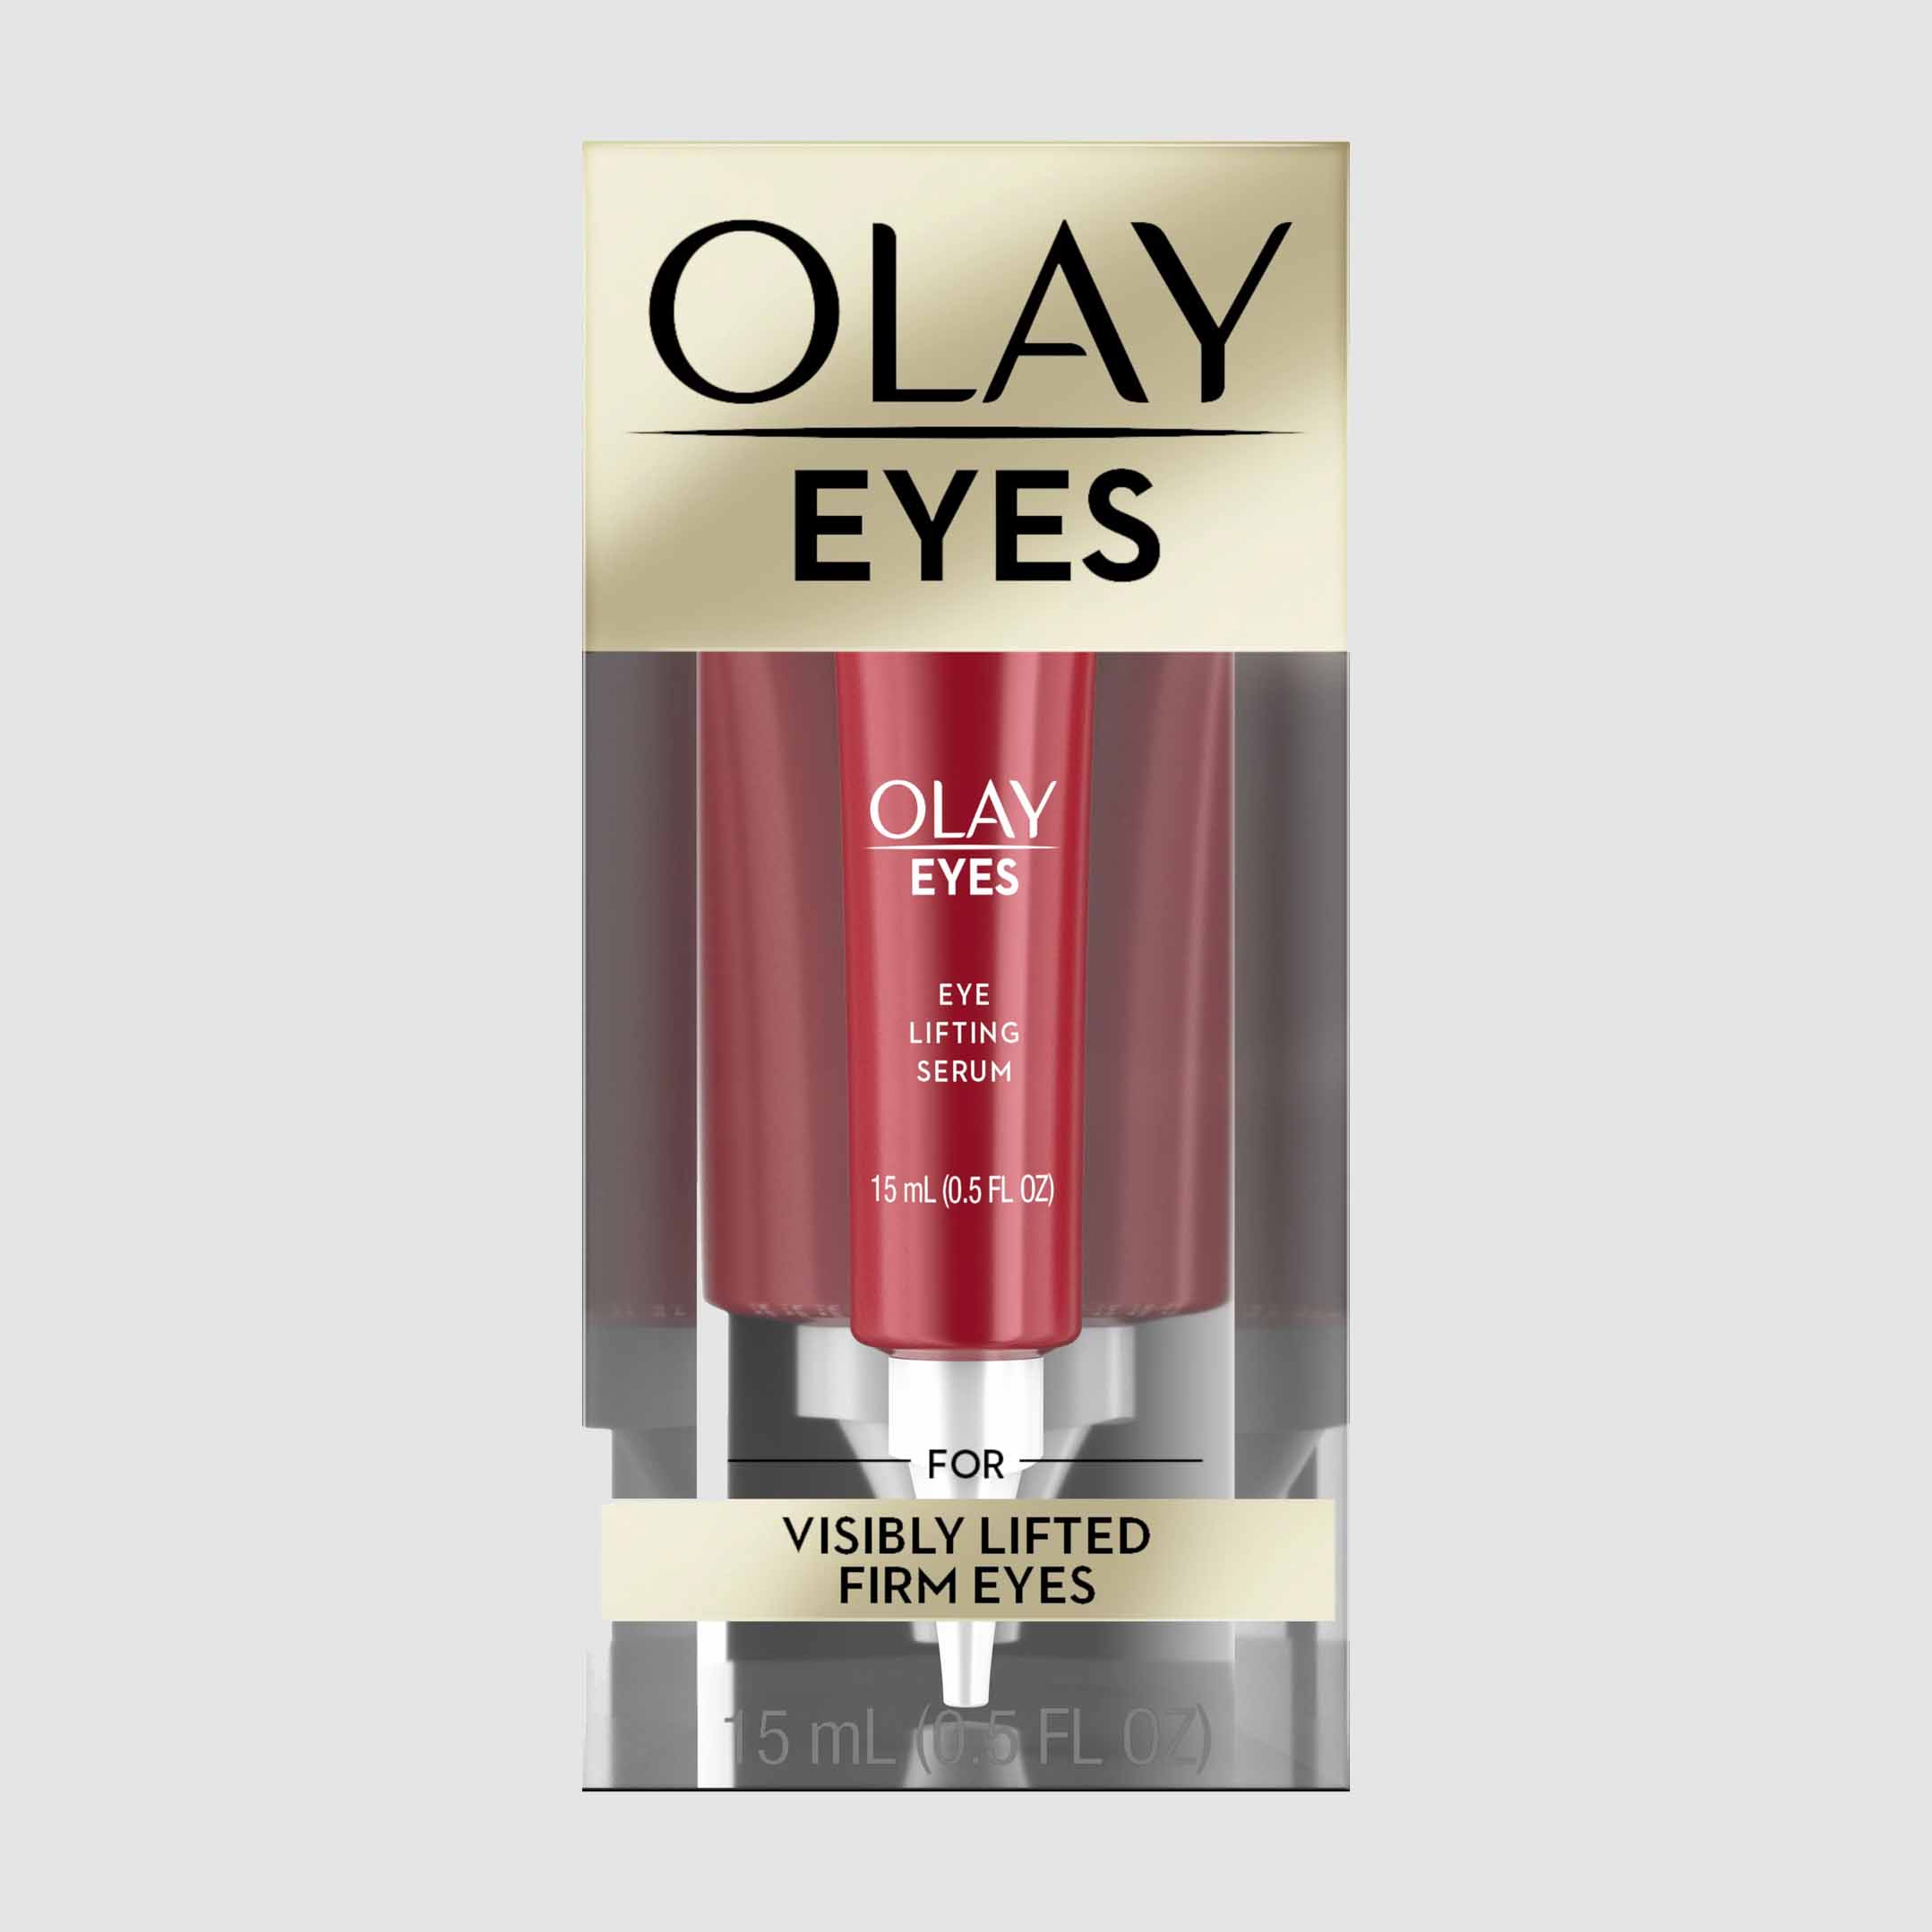 Olay Eye Lifting Serum for Firming Skin, Fragrance-Free in gold packet